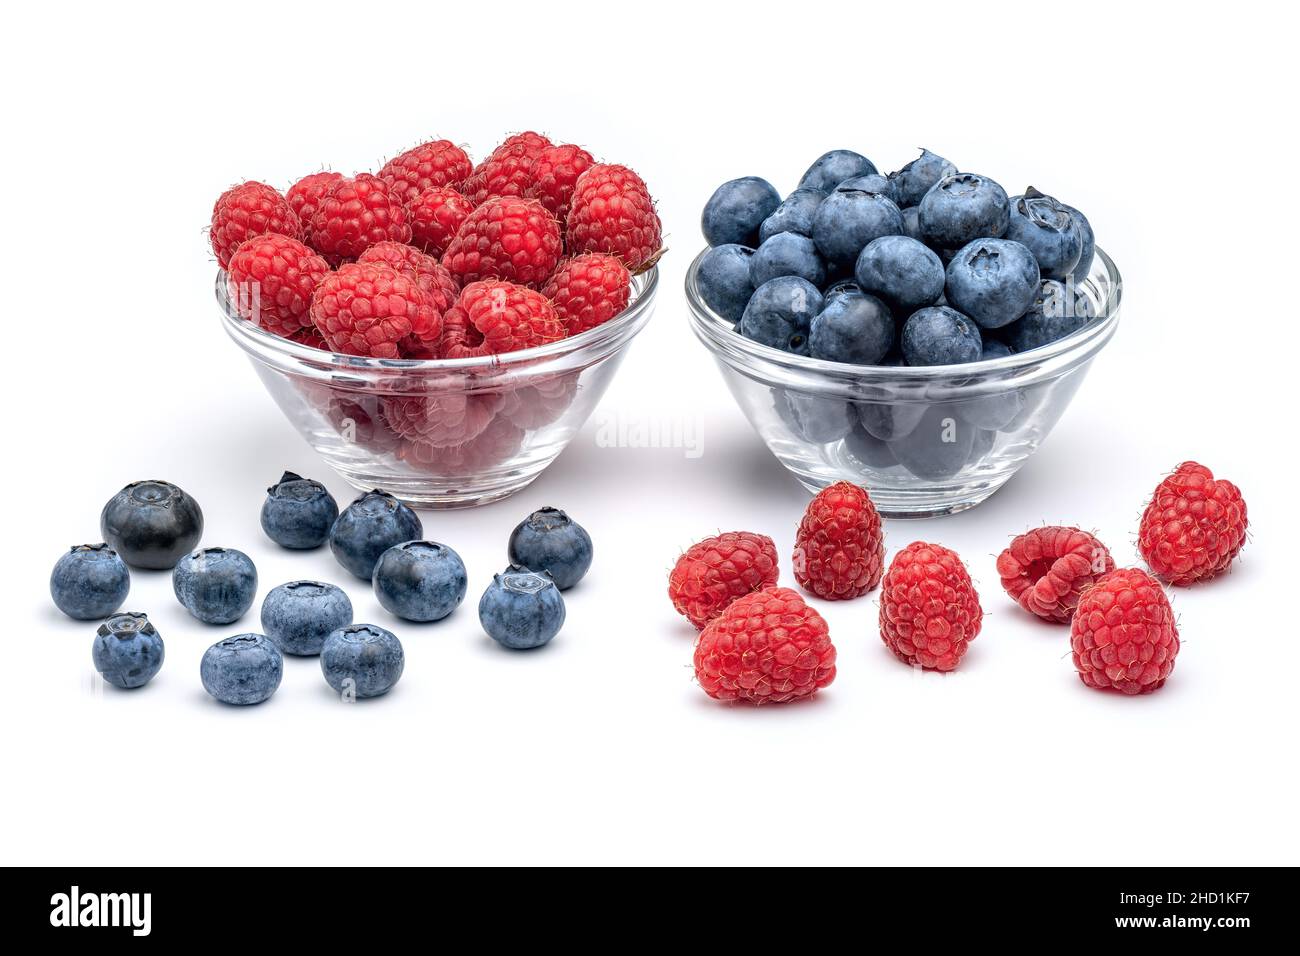 Fresh raspberries and blueberries in glass bowls isolated on white background. Berries in bowl. Stock Photo